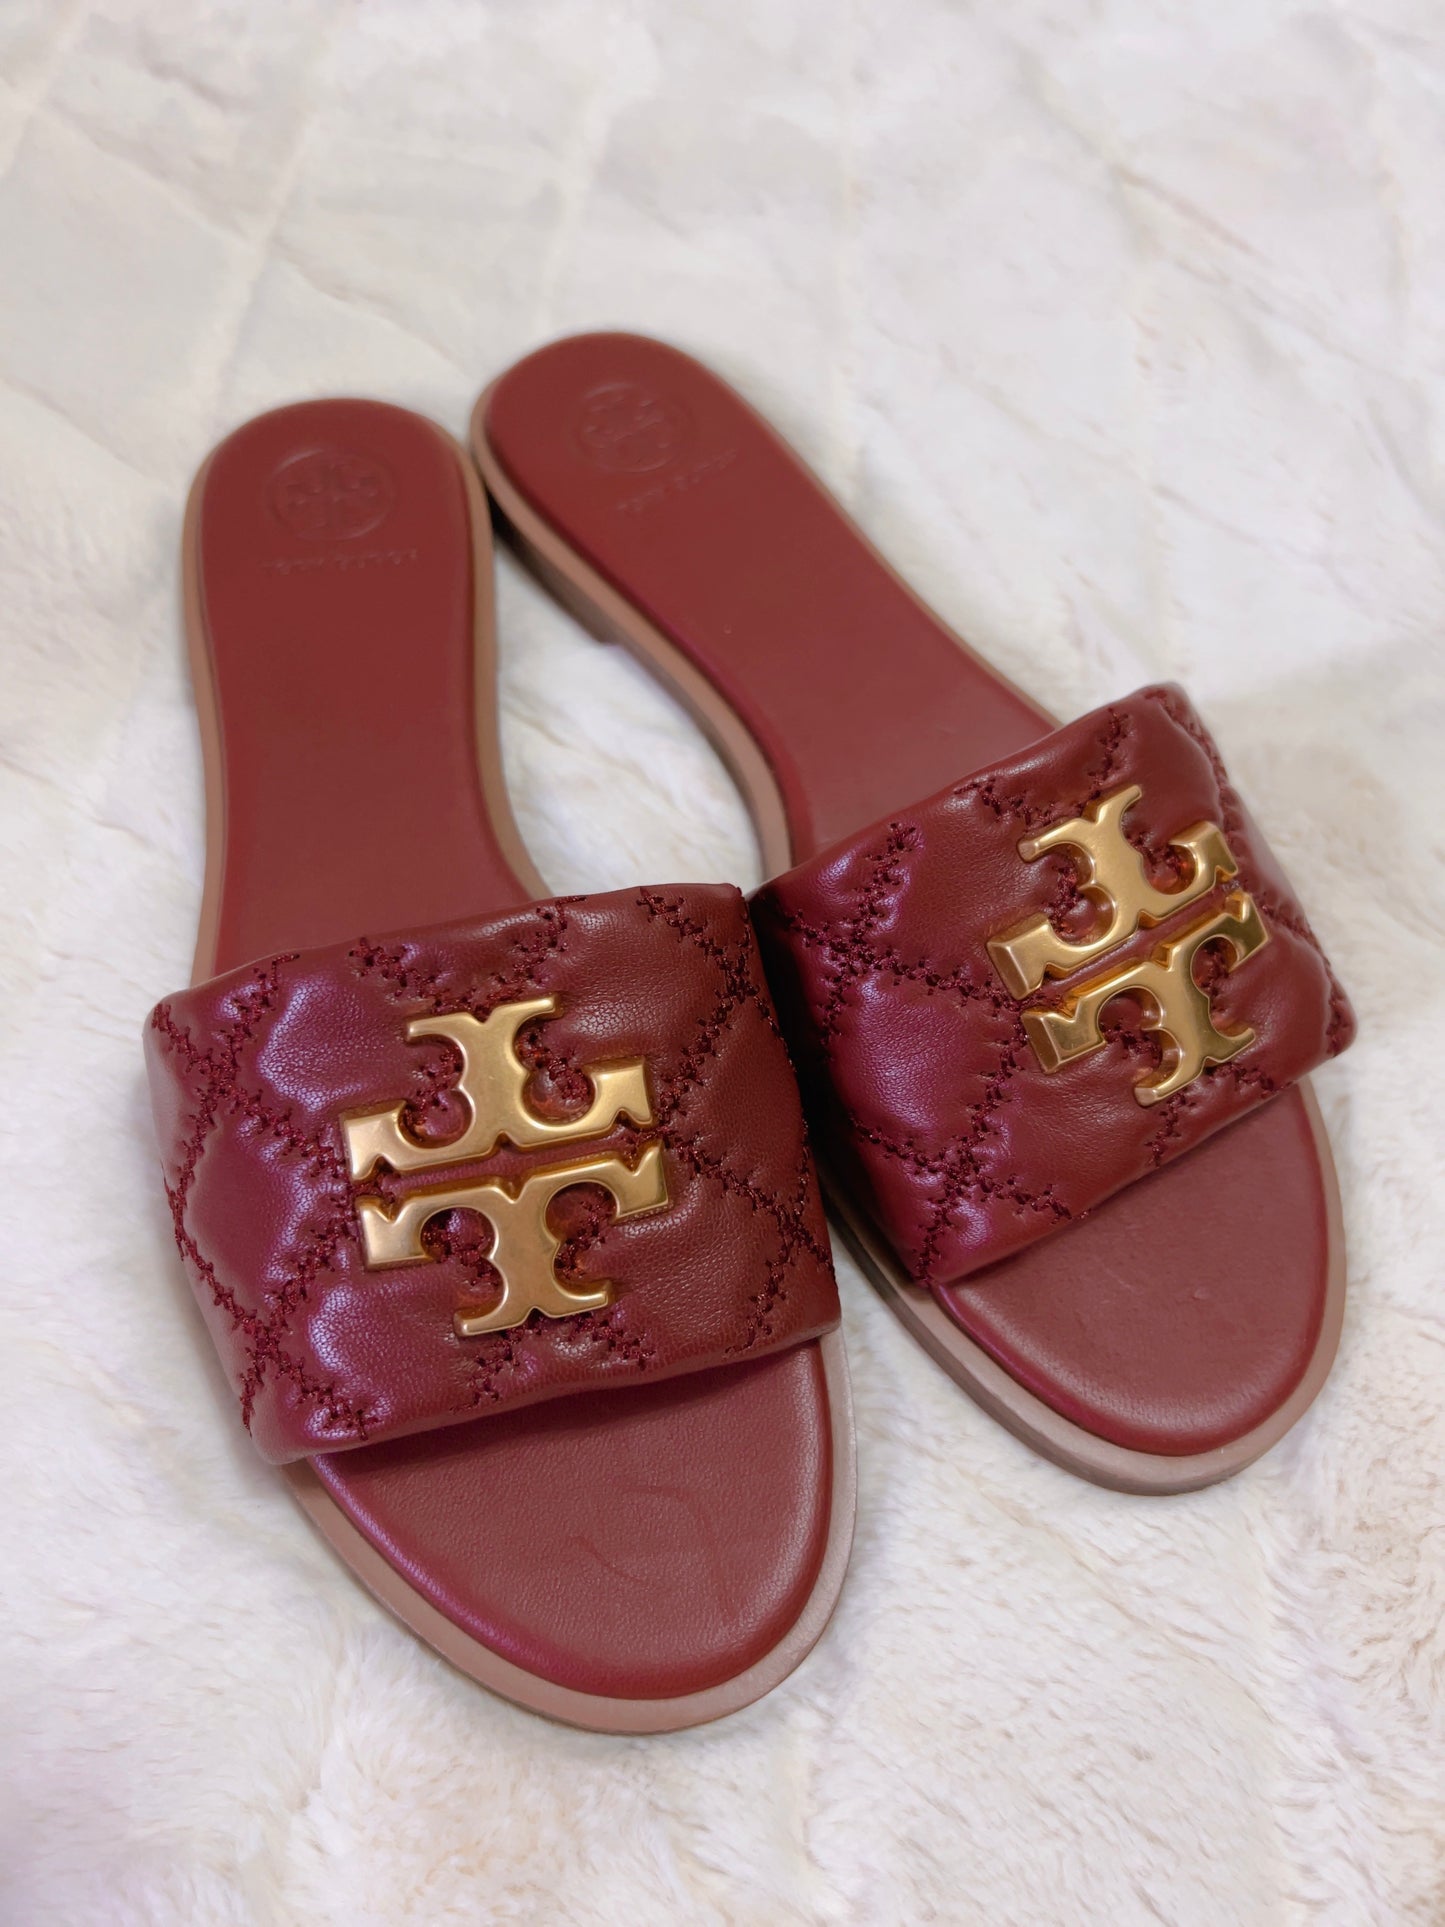 Tory Burch Everly Slide Sandals, Quilted Nappa Leather, Roma Red, Size 7.5